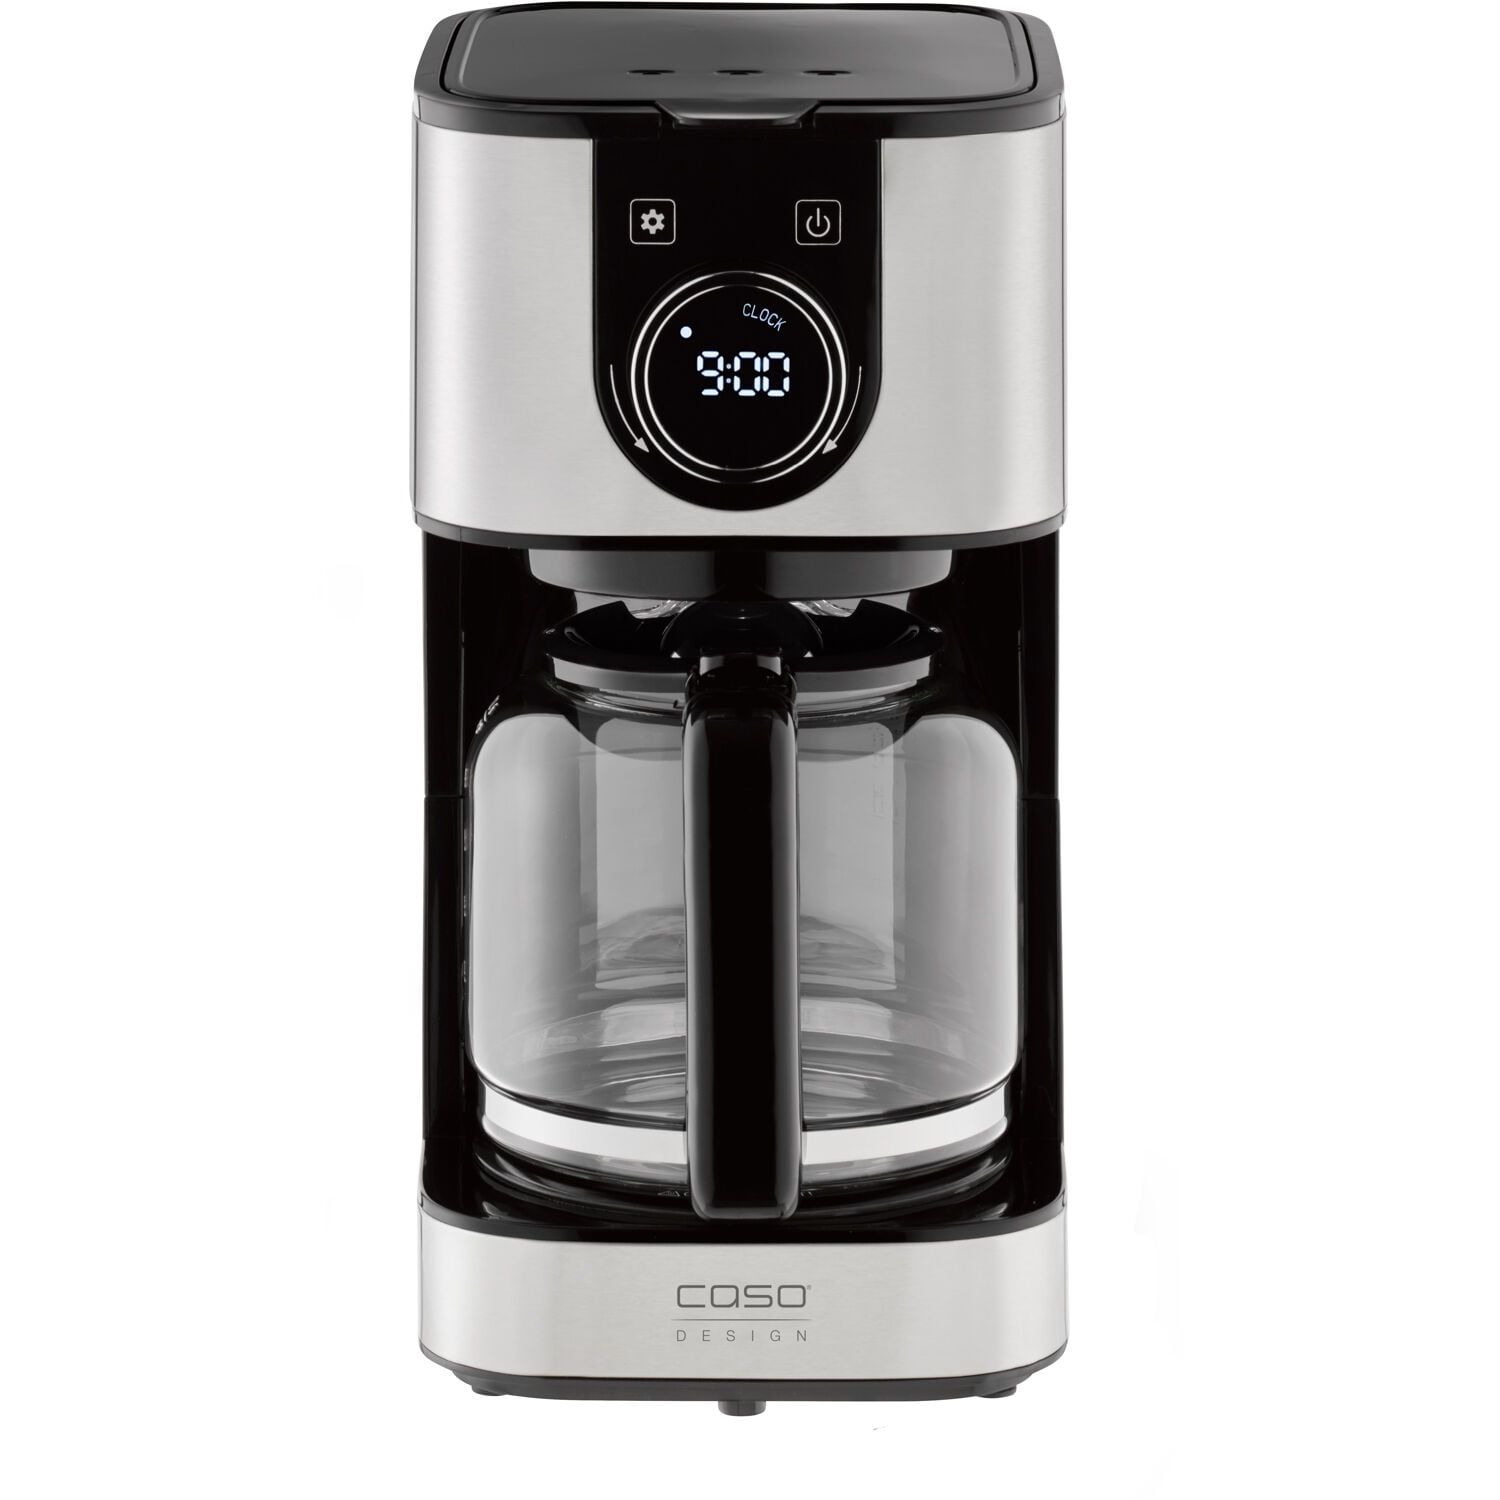 Capresso 435.05 Thermal Coffee Maker ST300 10 Cup Stainless Steel